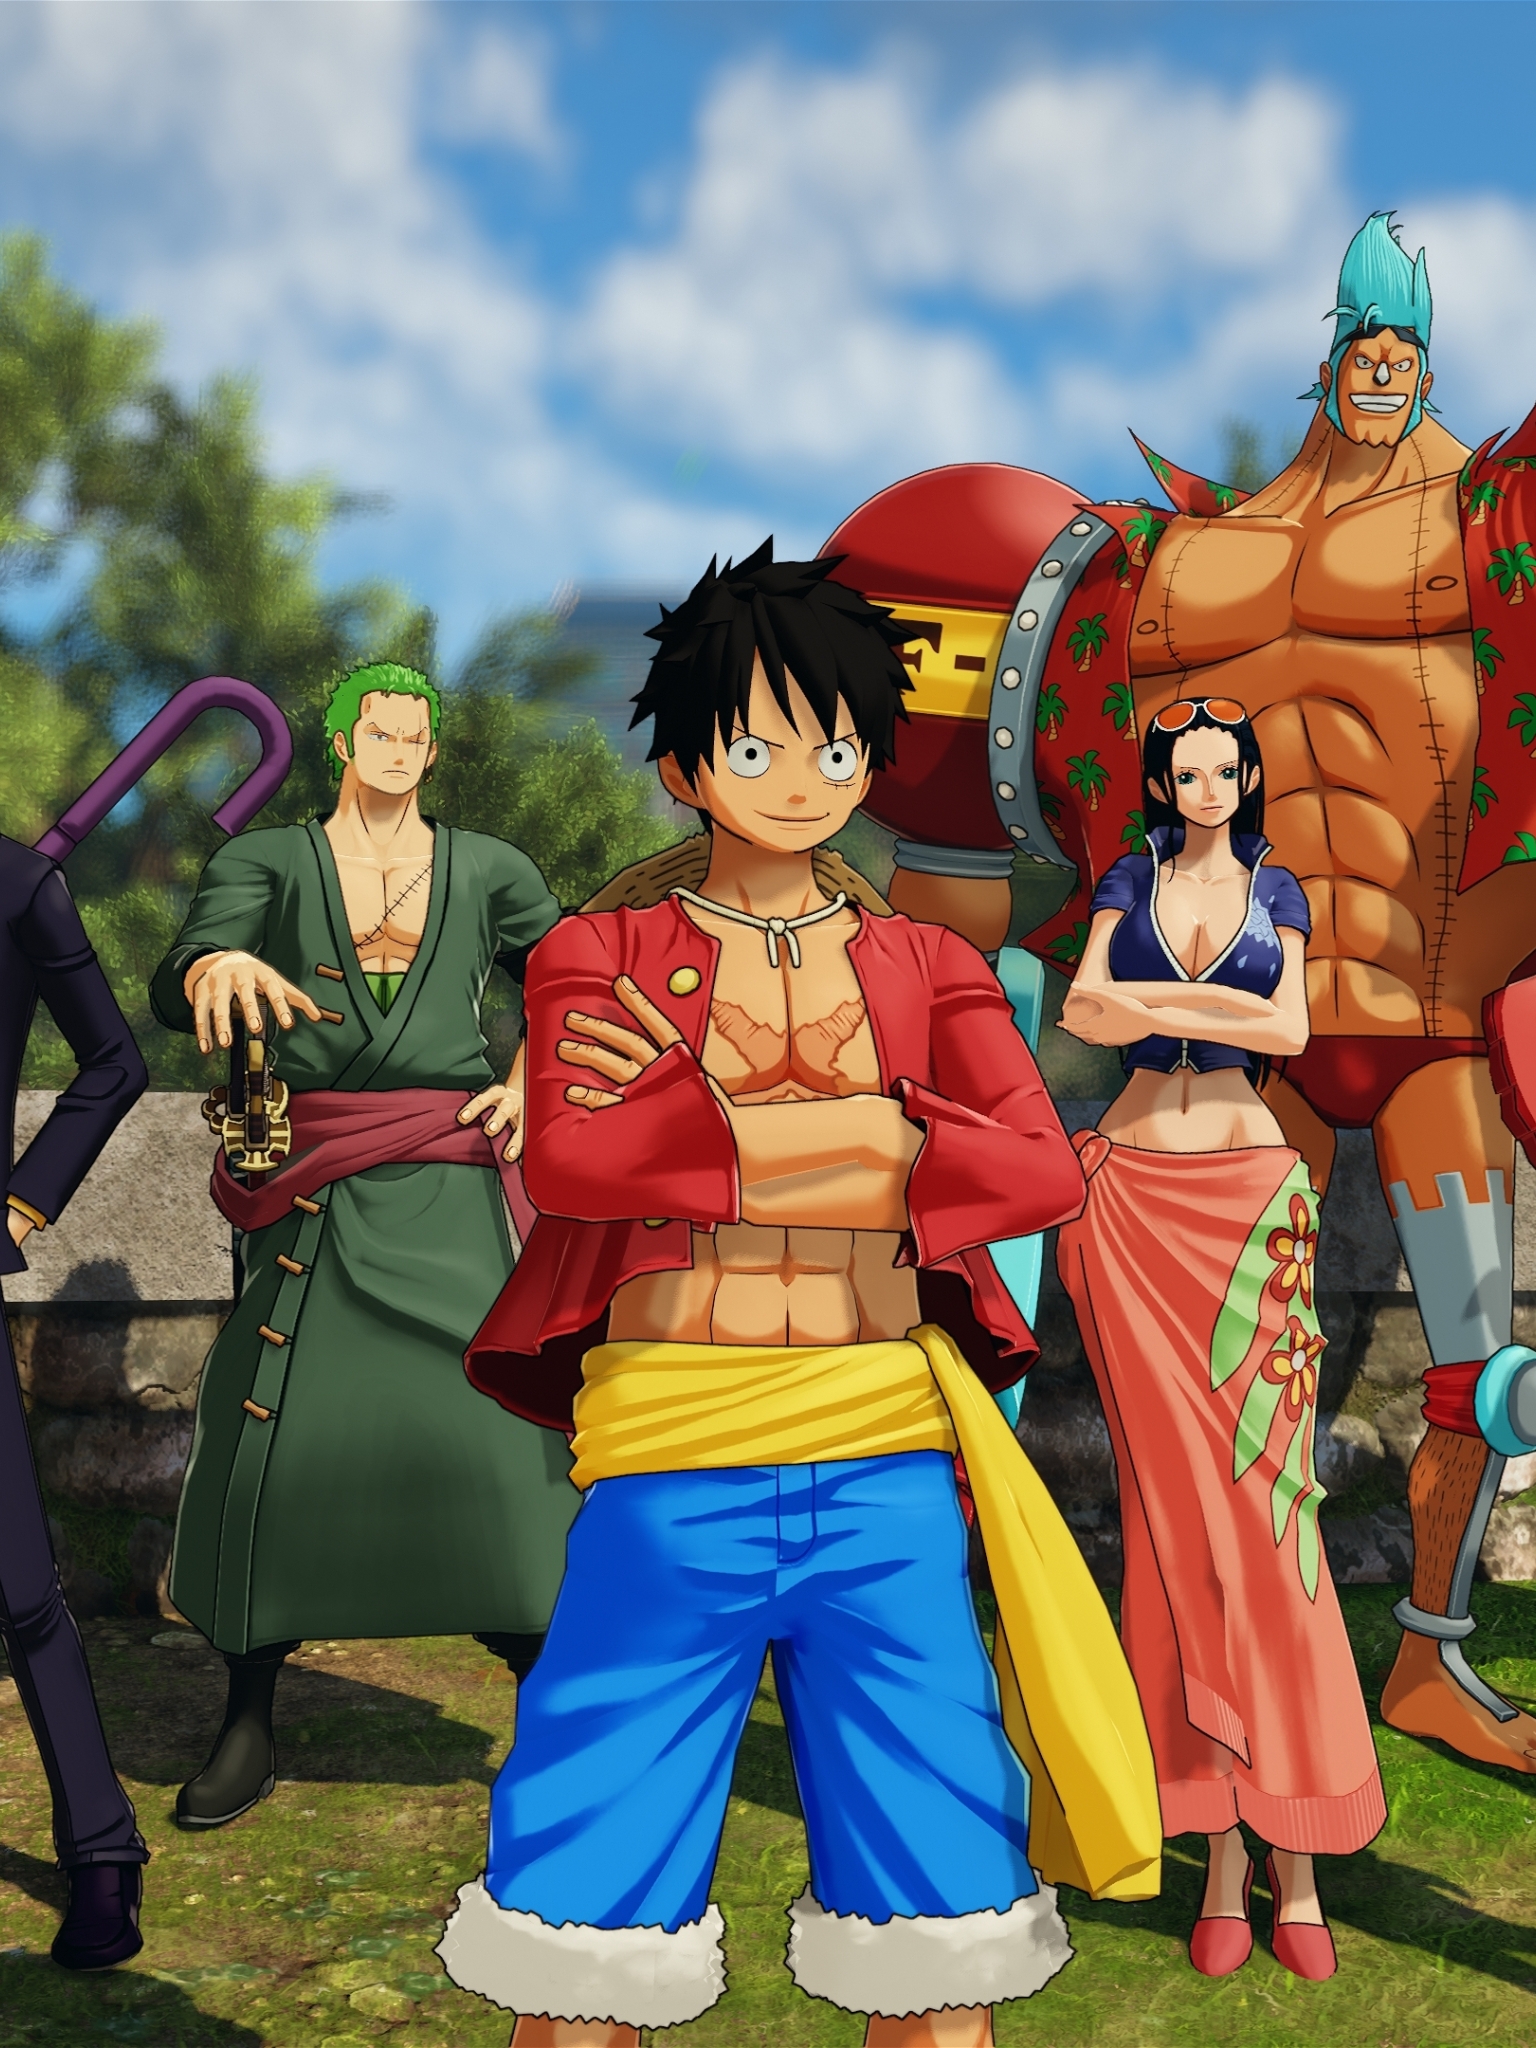 1536x48 One Piece World Seeker 4k 1536x48 Resolution Wallpaper Hd Games 4k Wallpapers Images Photos And Background